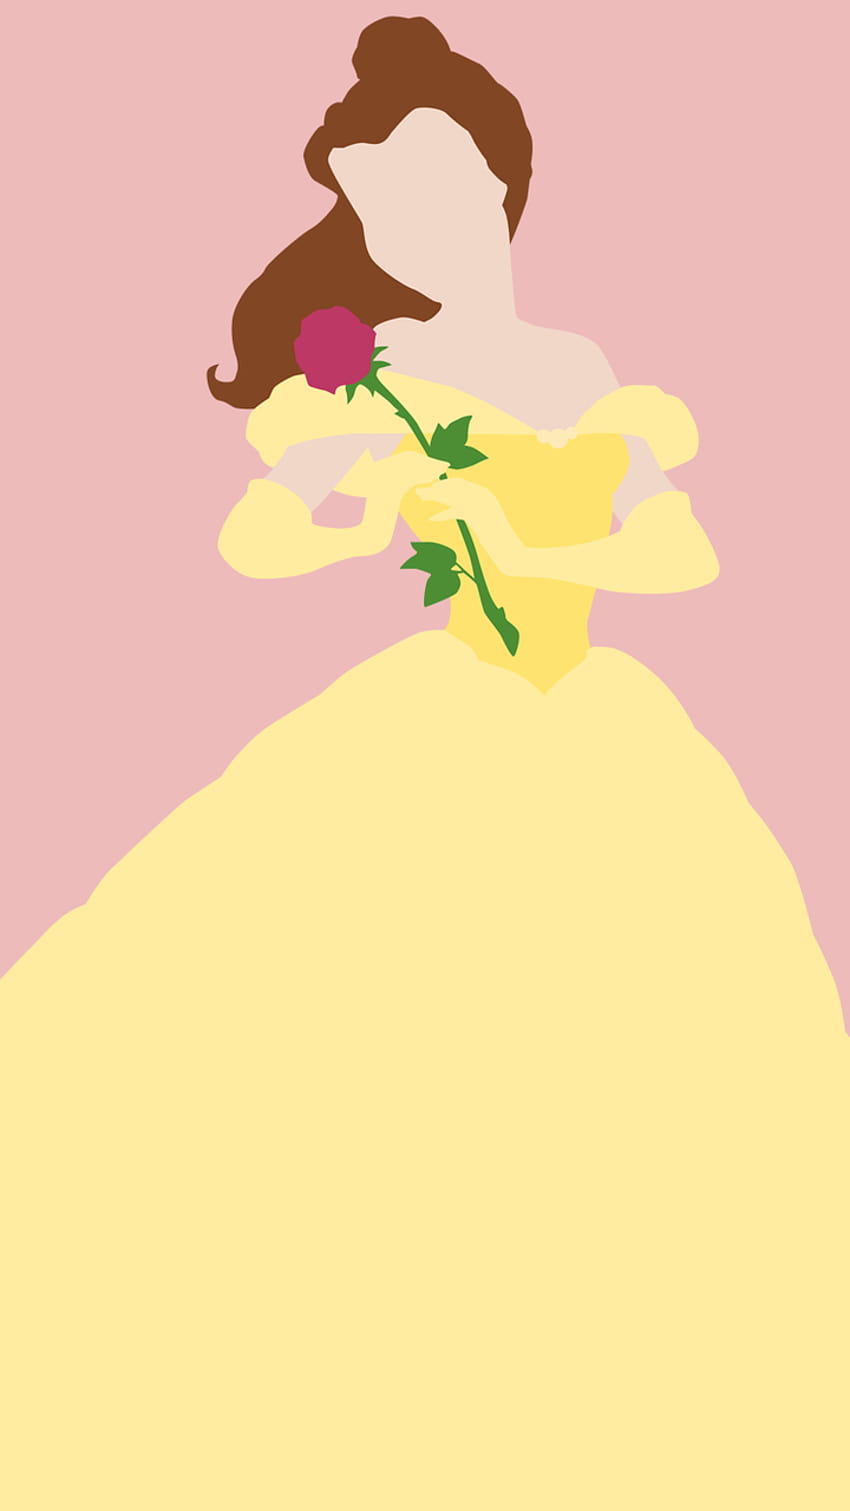 discovered by Lauren. Find and videos about disney, poster and belle, disney princess minimalist HD phone wallpaper